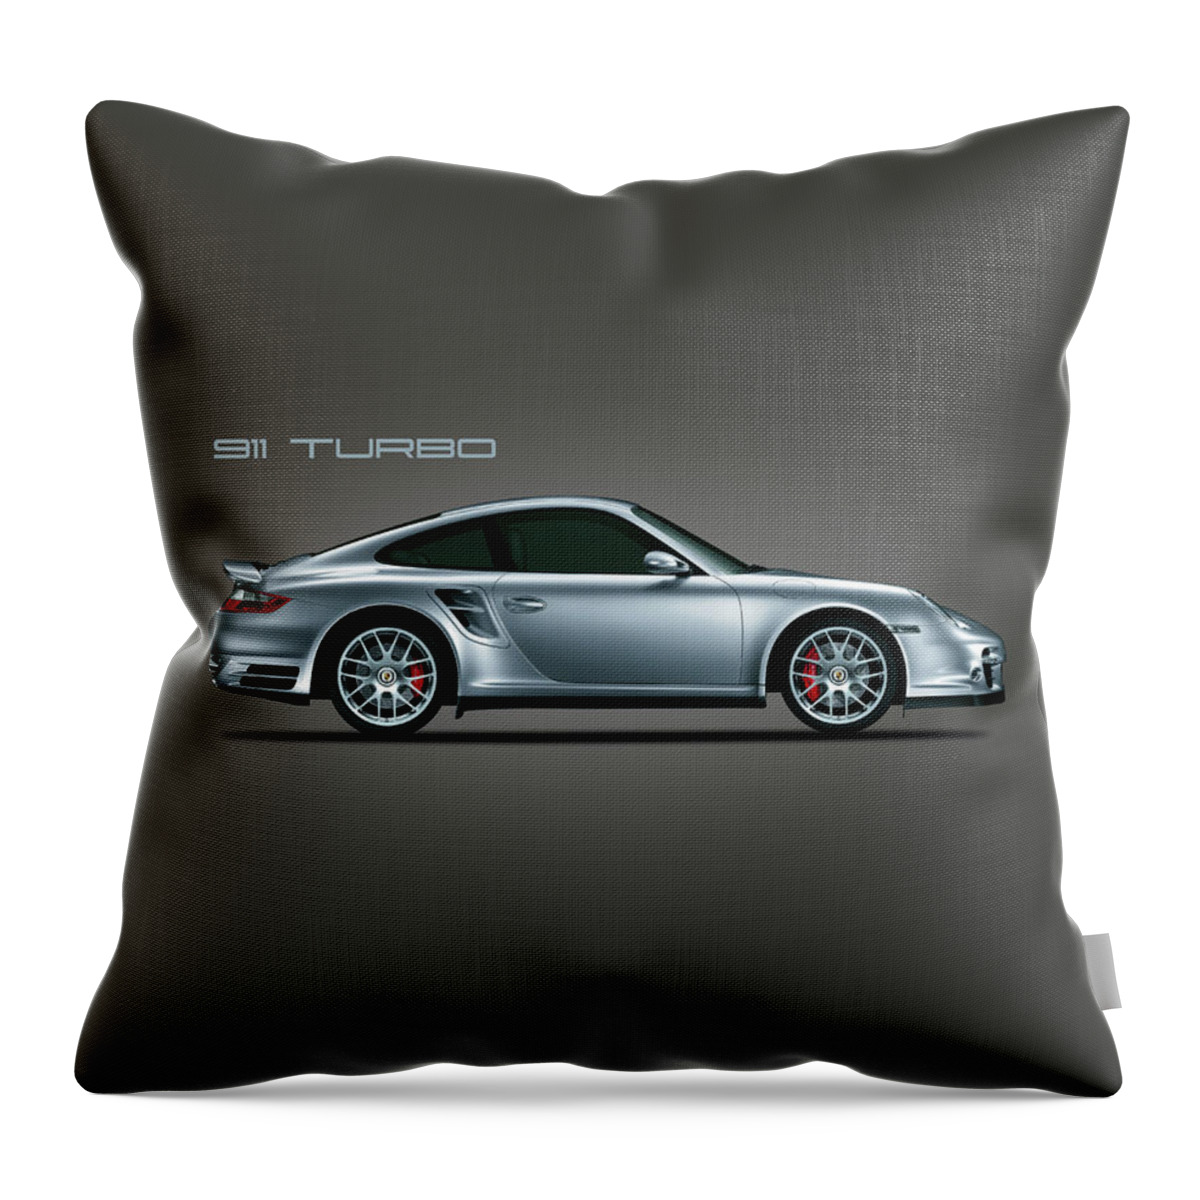 Porsche Throw Pillow featuring the photograph The Iconic 911 Turbo by Mark Rogan